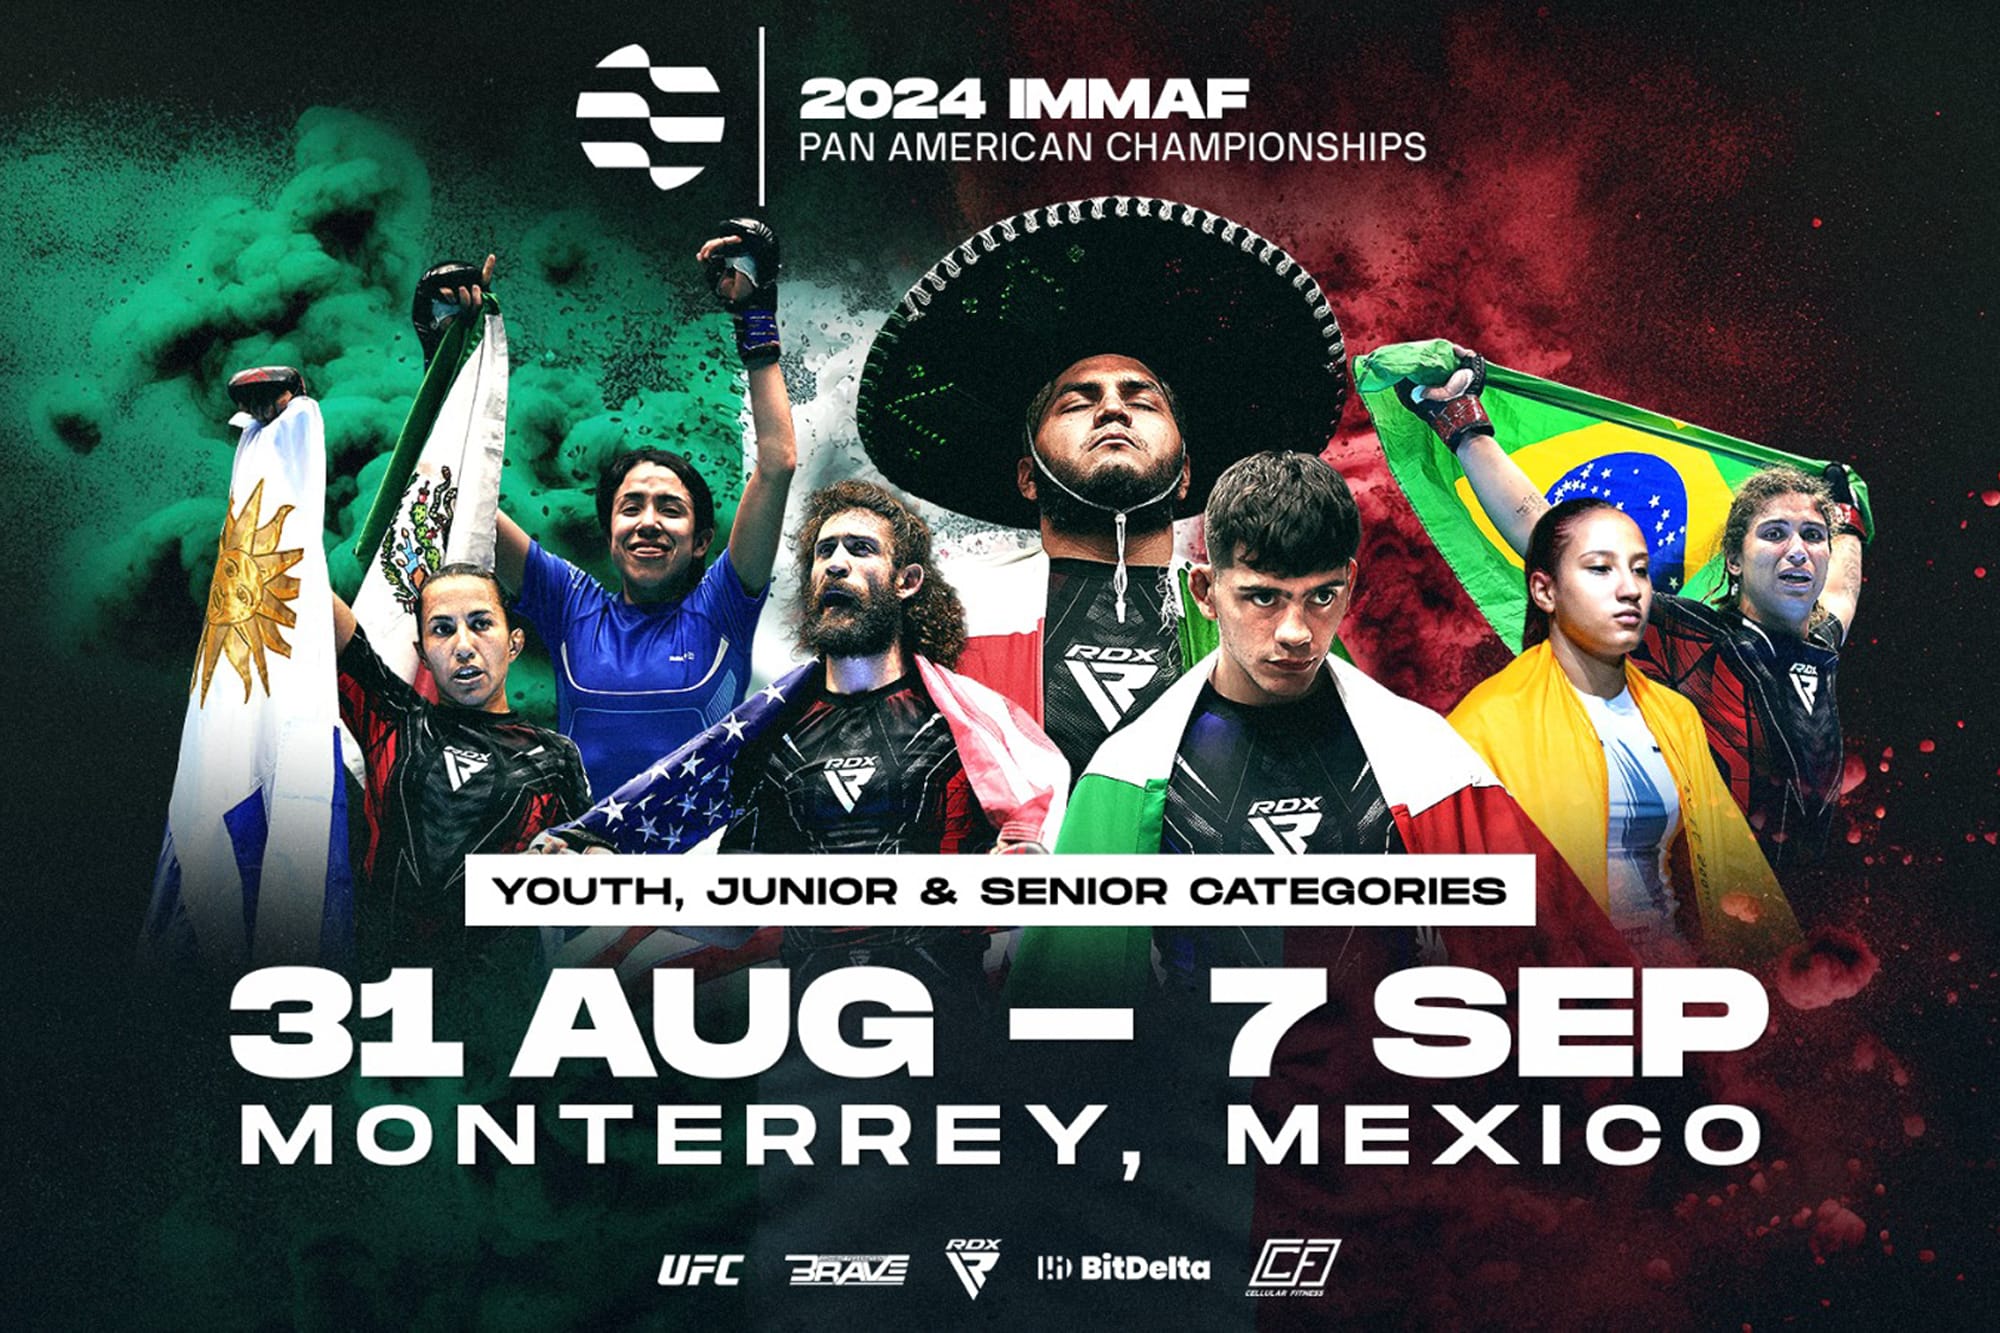 IMMAF Pan American Championships 2024 to Include Youth Tournament for the First Time